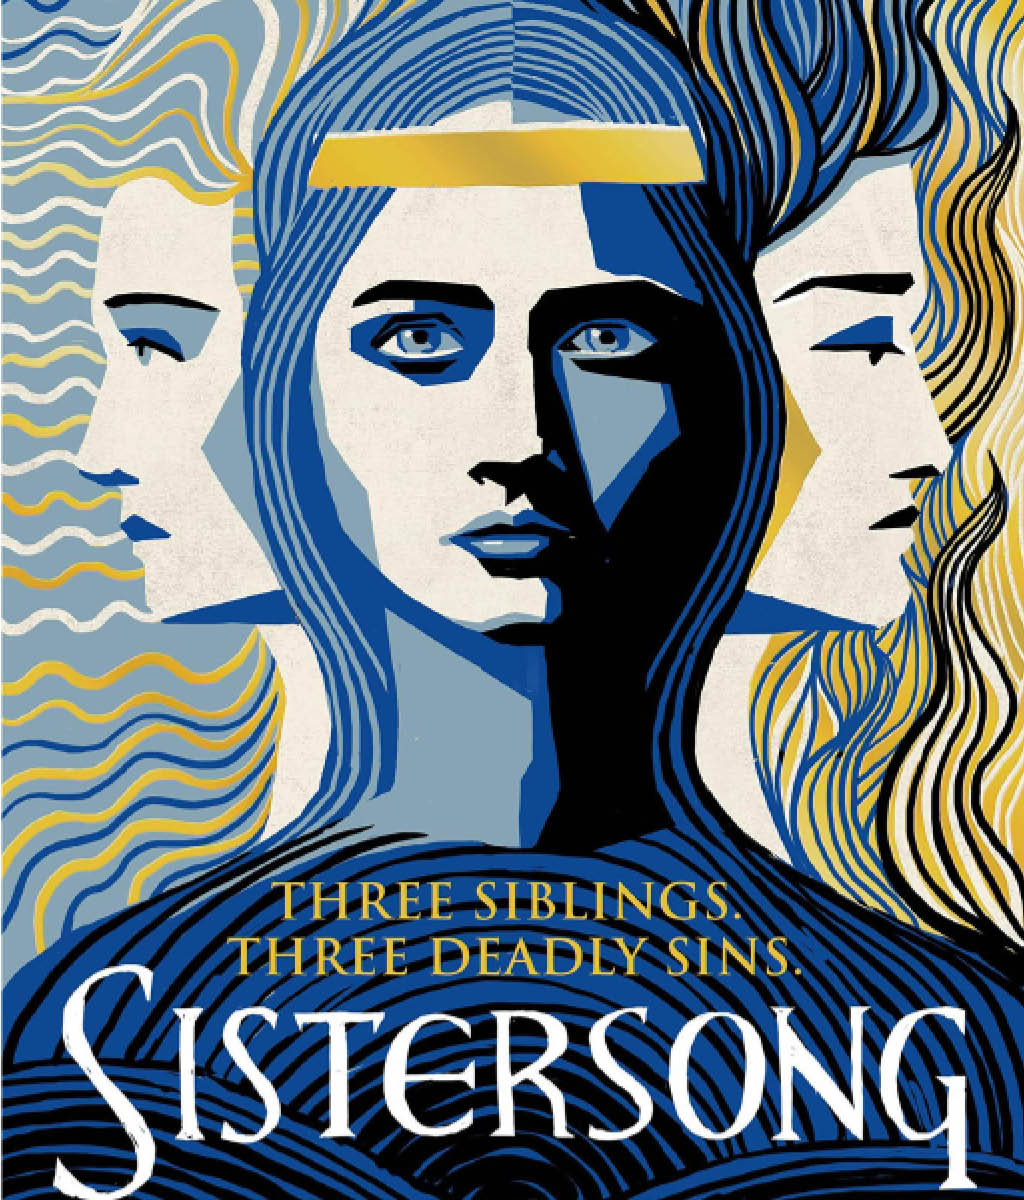 Sistersong by Lucy Holland